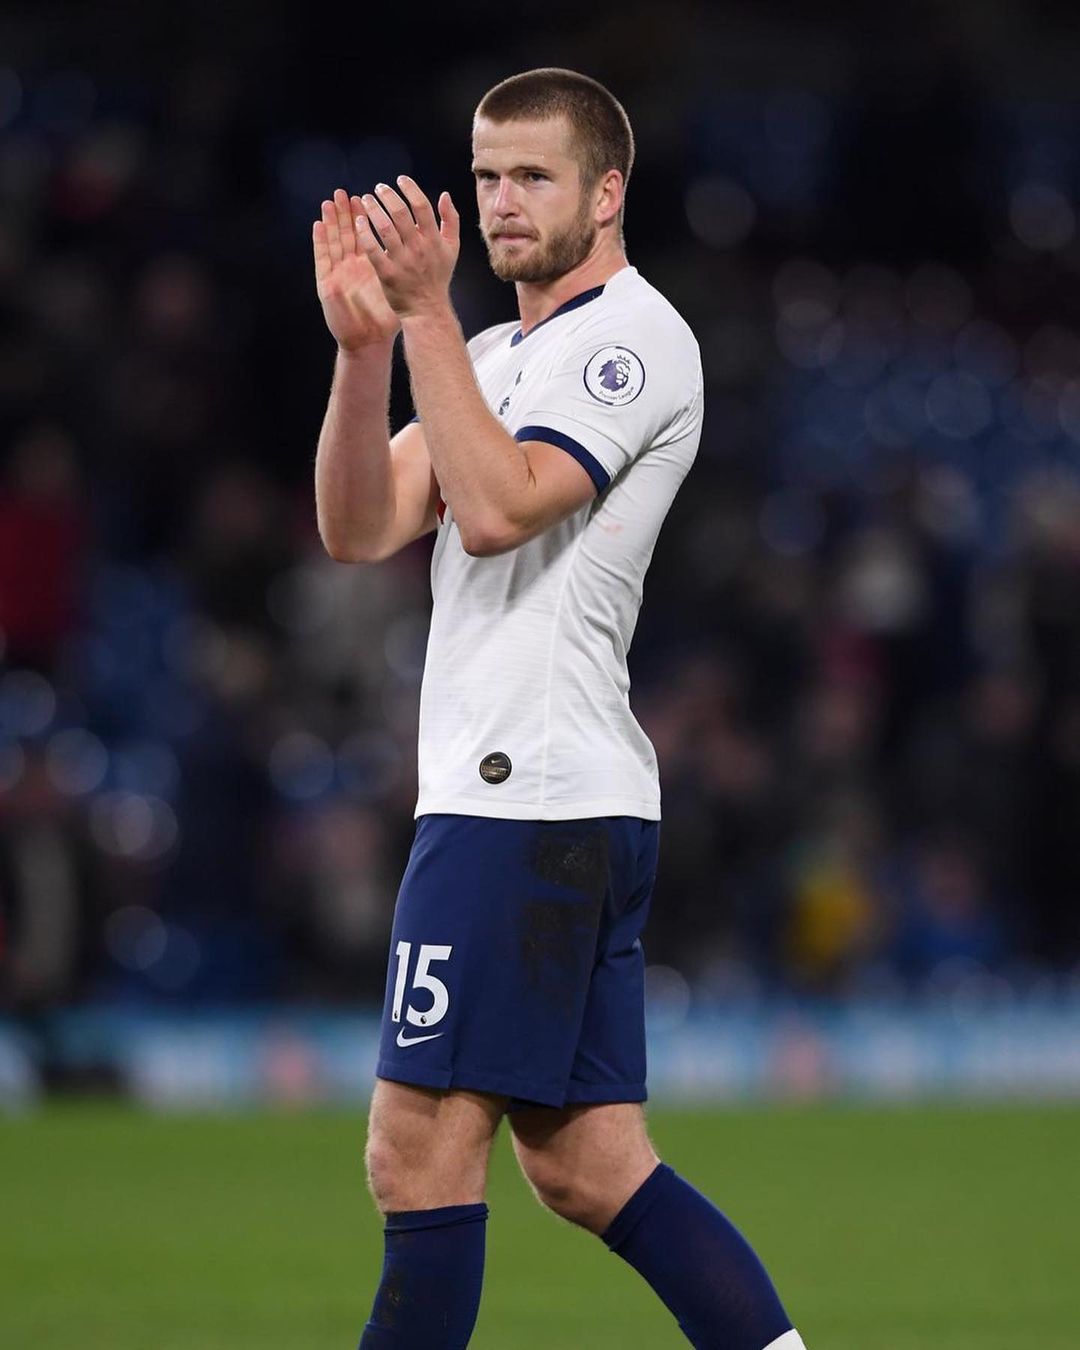 funke-akindele-pa-james-house-flood-trump-remove-us-from-who-eric-dier-match-ban-latest-news-global-world-stories-wednesday-july-2020-style-rave